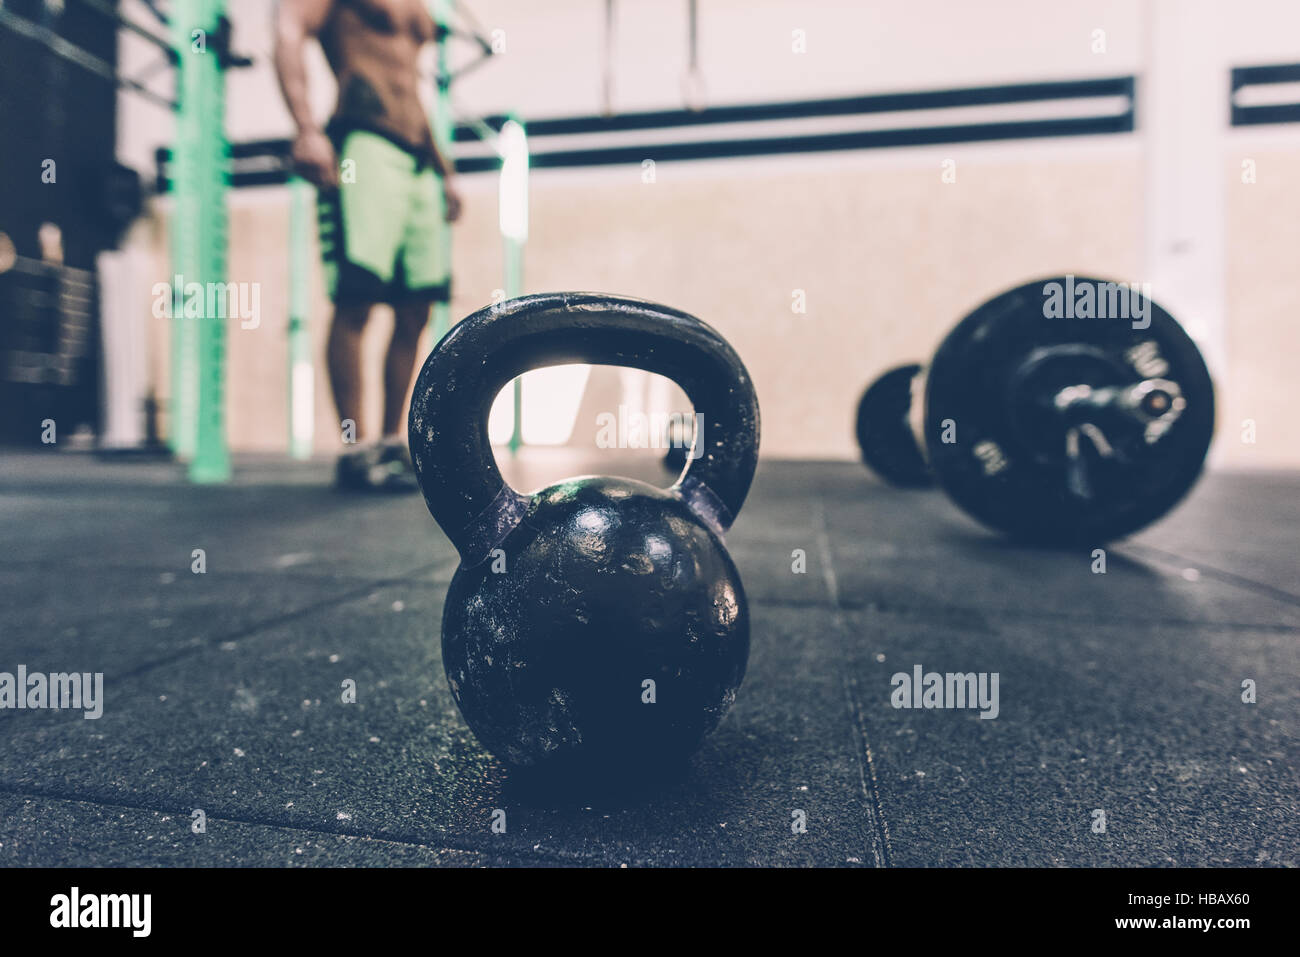 Kettlebell and barbell on floor of cross training gym Stock Photo